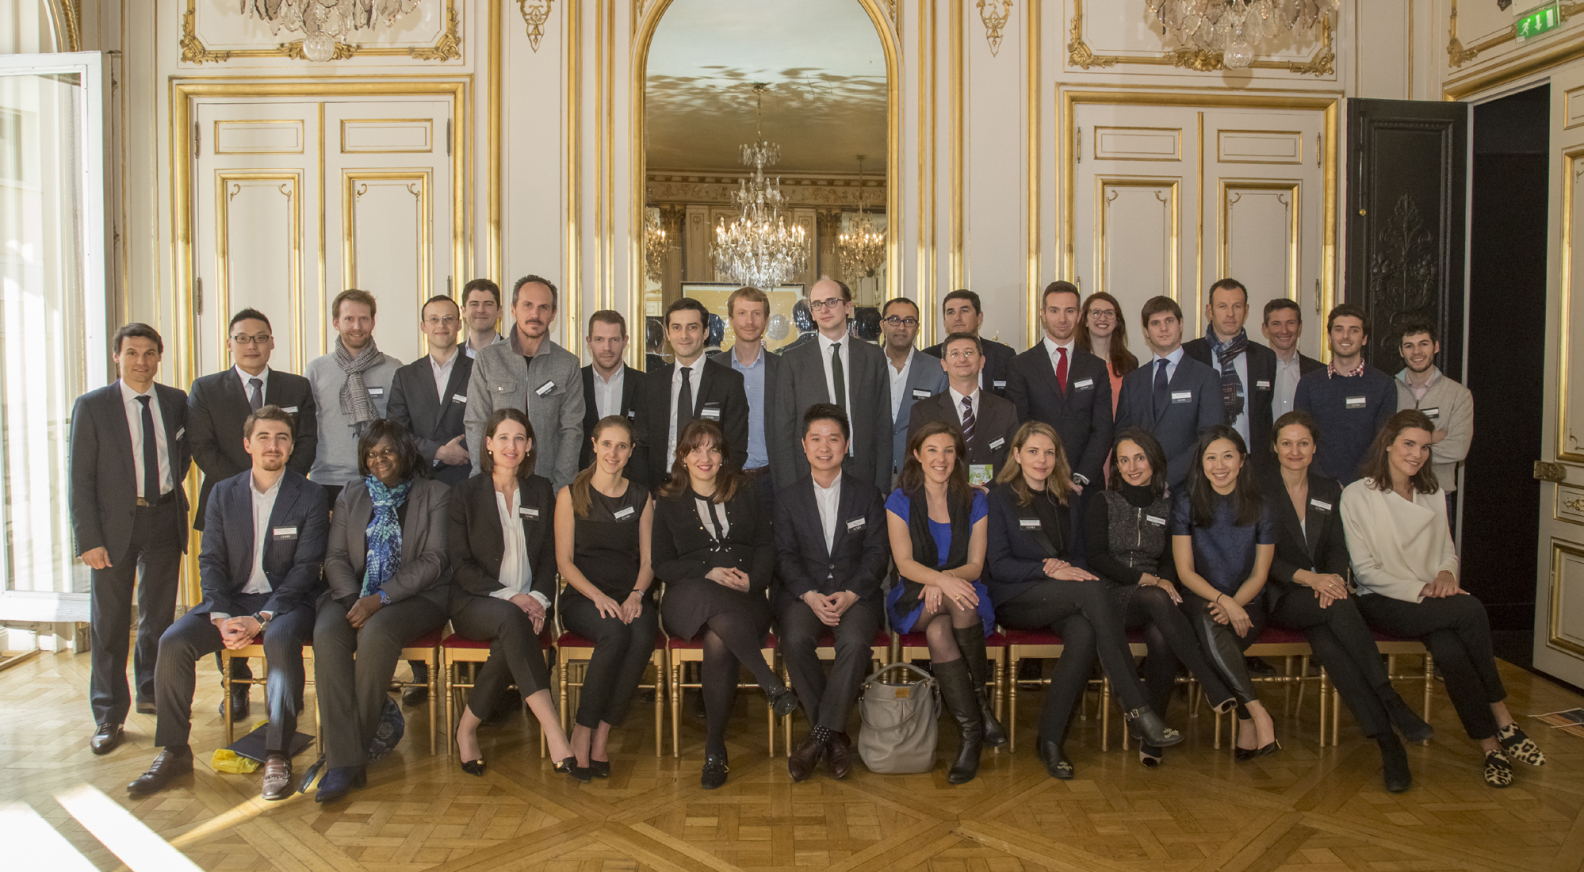 ESSEC LVMH Chair - The main goal of the ESSEC LVMH Chair is to prepare  young talents for careers in the luxury industry. To succeed in this, the  Chair gives students the